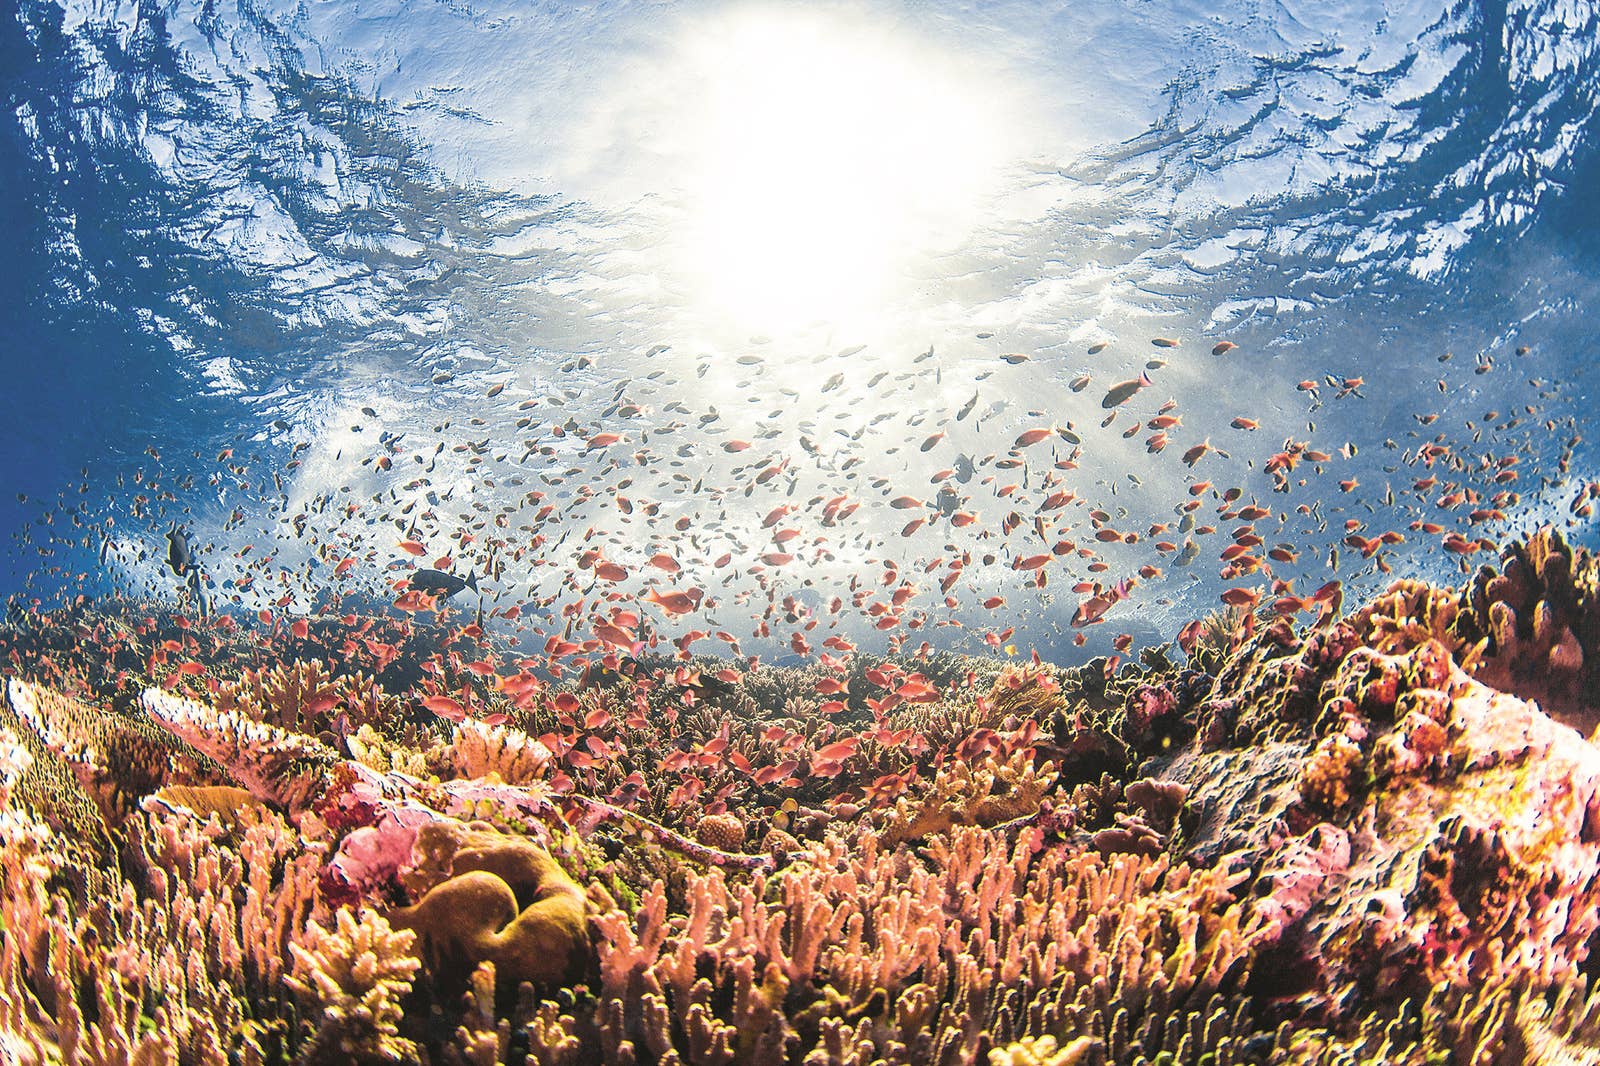 An underwater reef scene with fish and sunlight